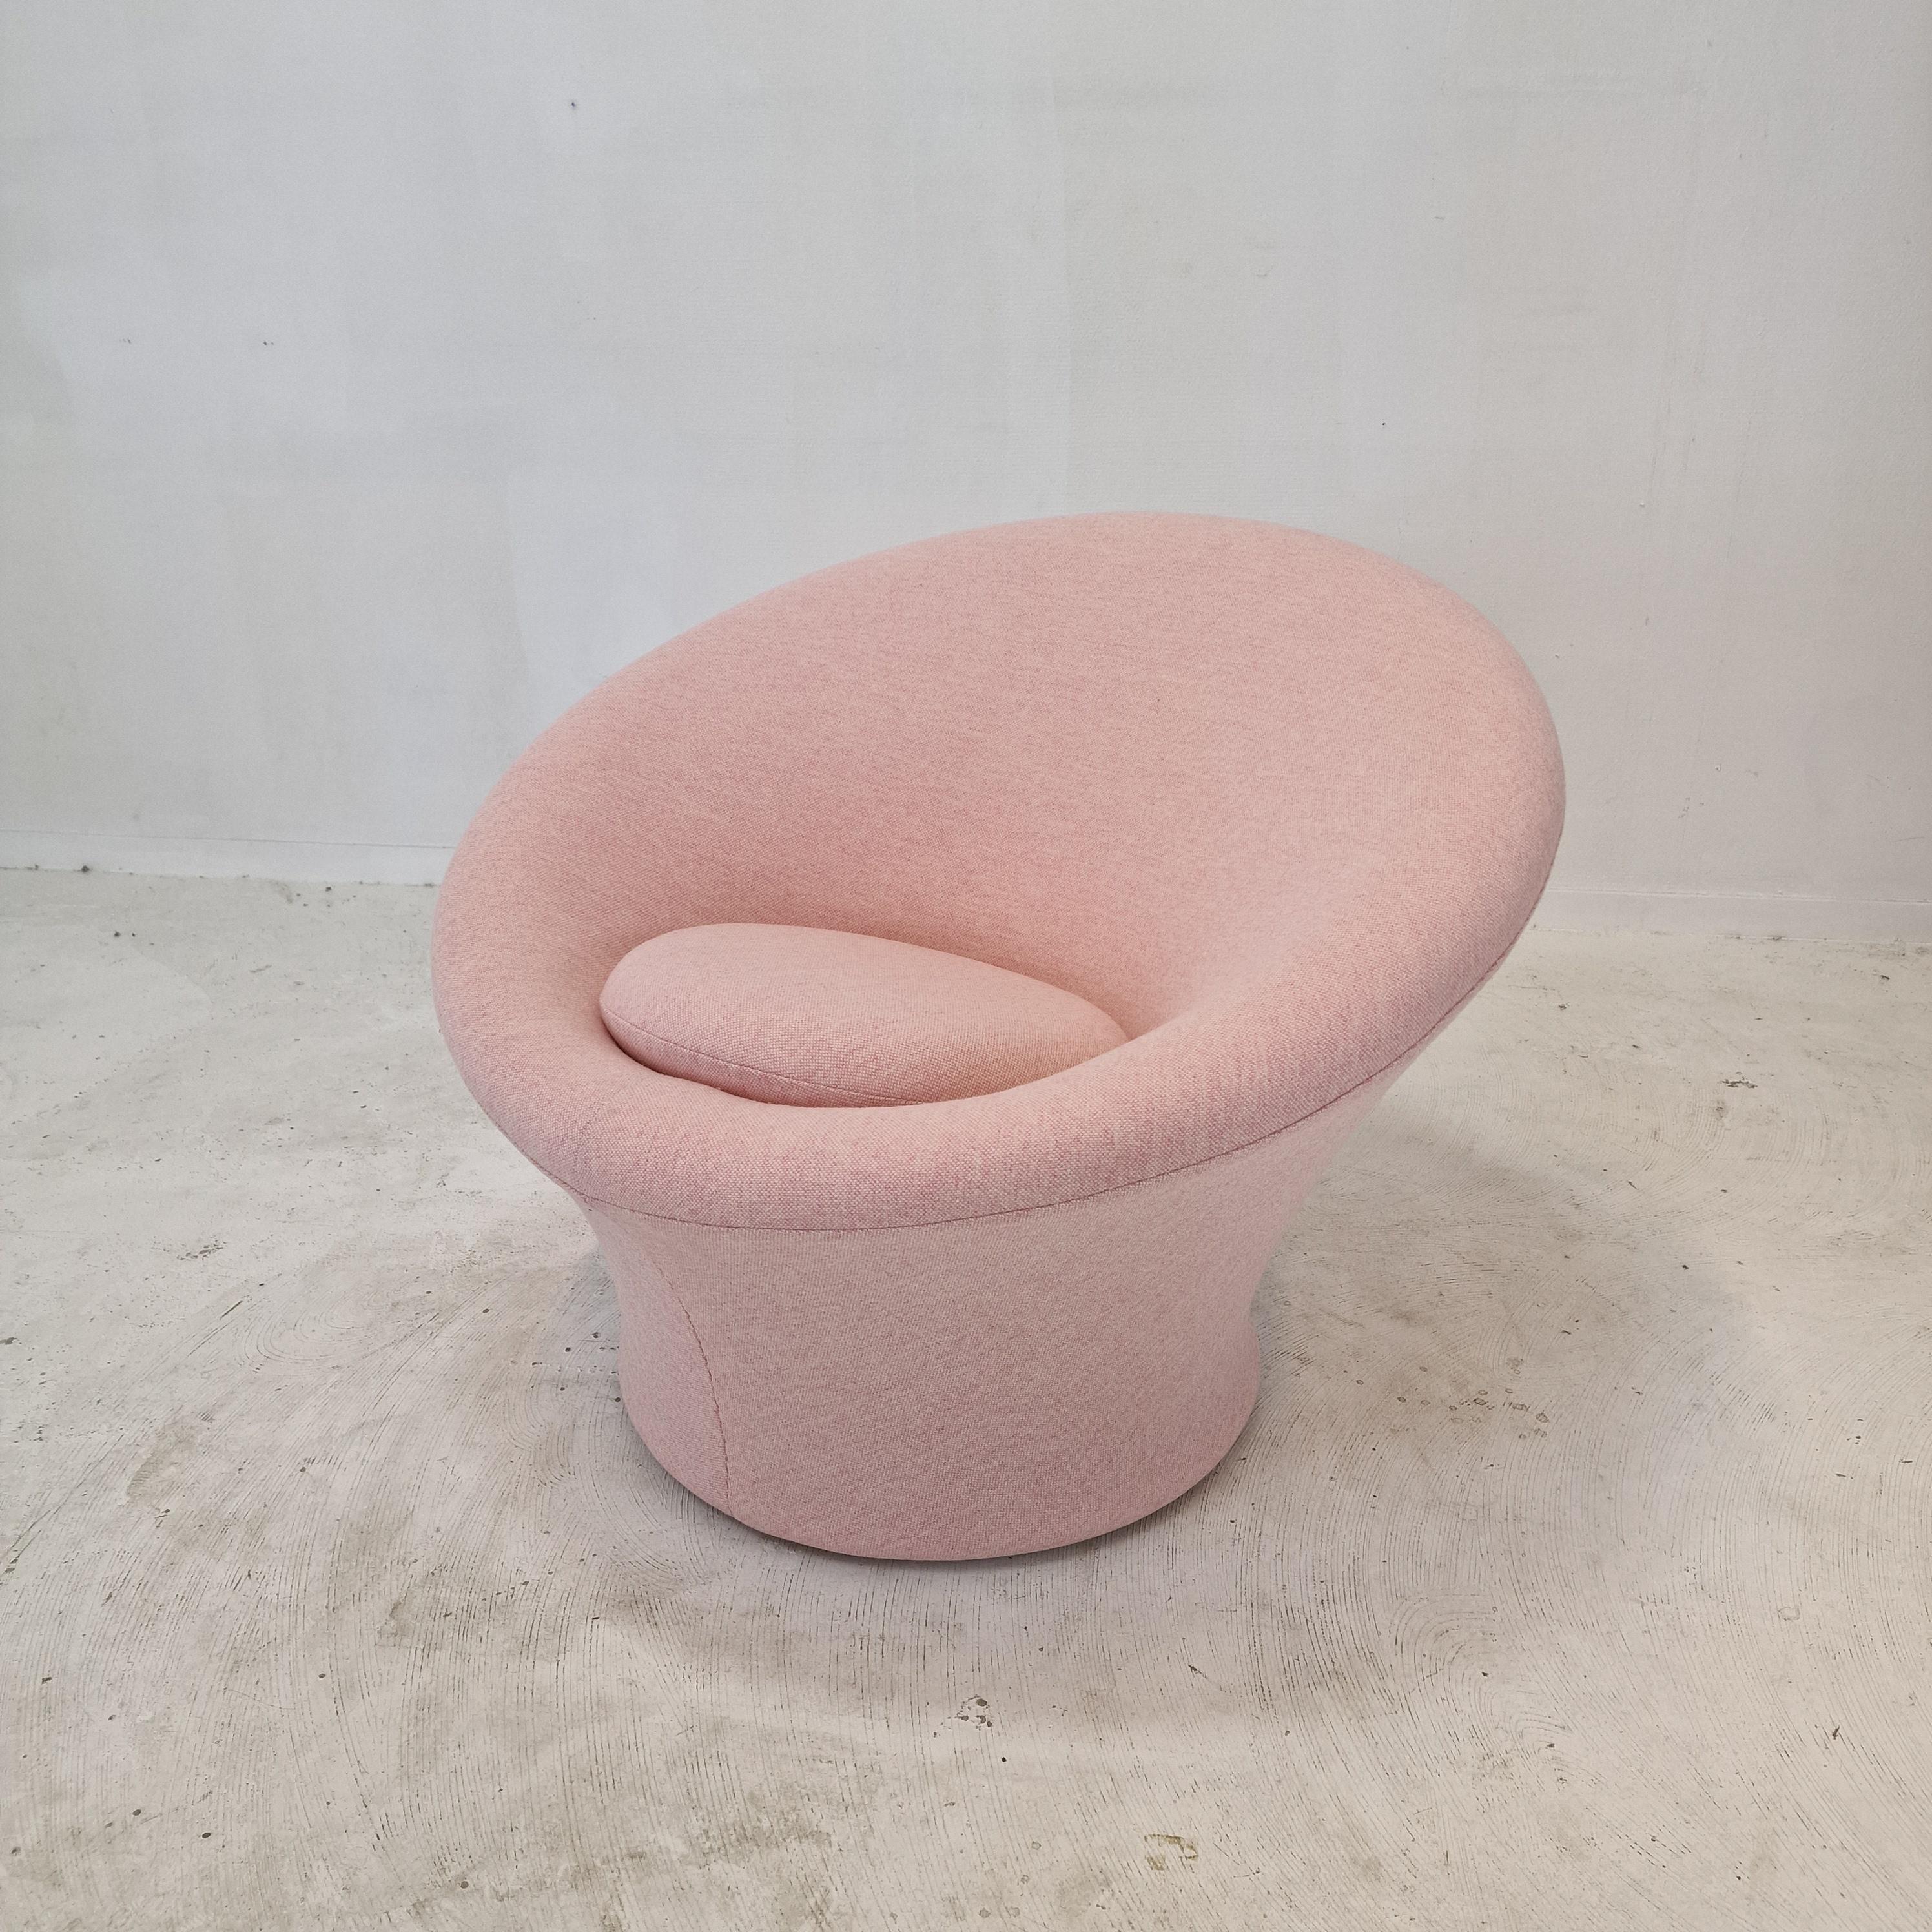 Very comfortable and cosy Artifort Mushroom chair, designed by Pierre Paulin in the 60’s. 
This particular chair is fabricated in the 80's

Covered with cute wool fabric, color pink.

The chair is completely restored with new fabric and new